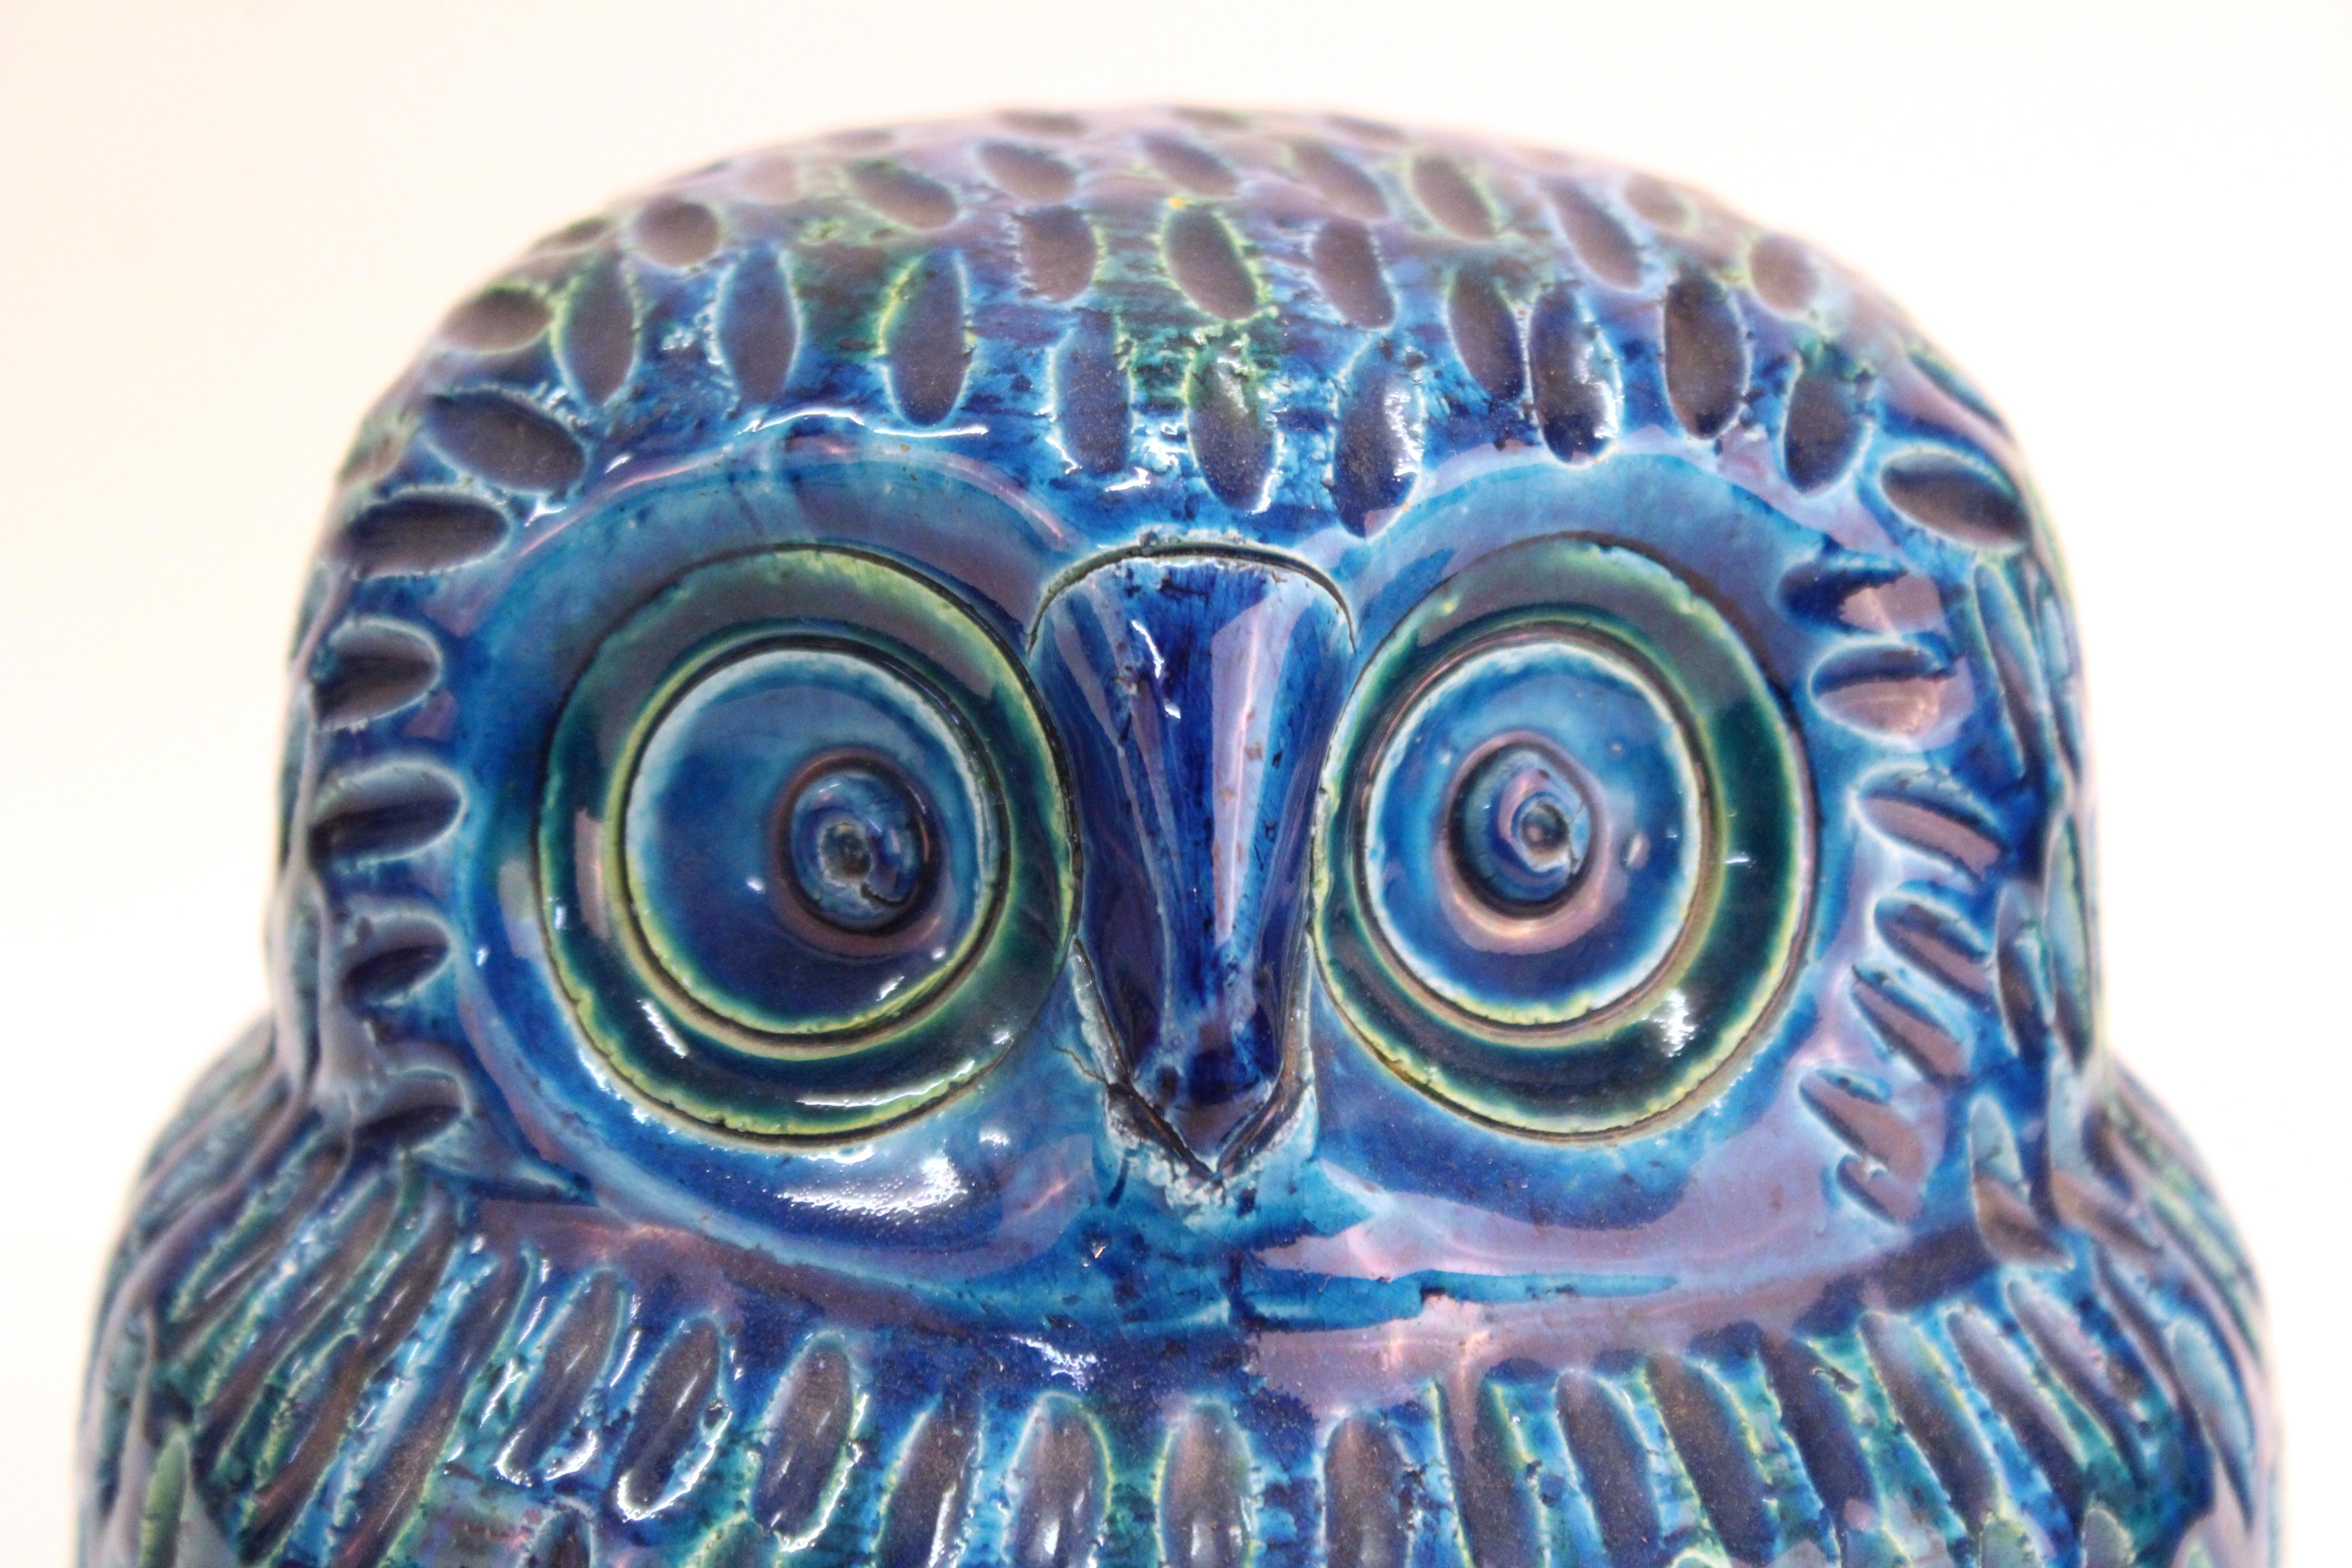 Italian Mid-Century Modern blue ceramic stylized owl sculpture made by Bitossi in the mid-20th century. The piece is in great vintage condition with age-appropriate wear.